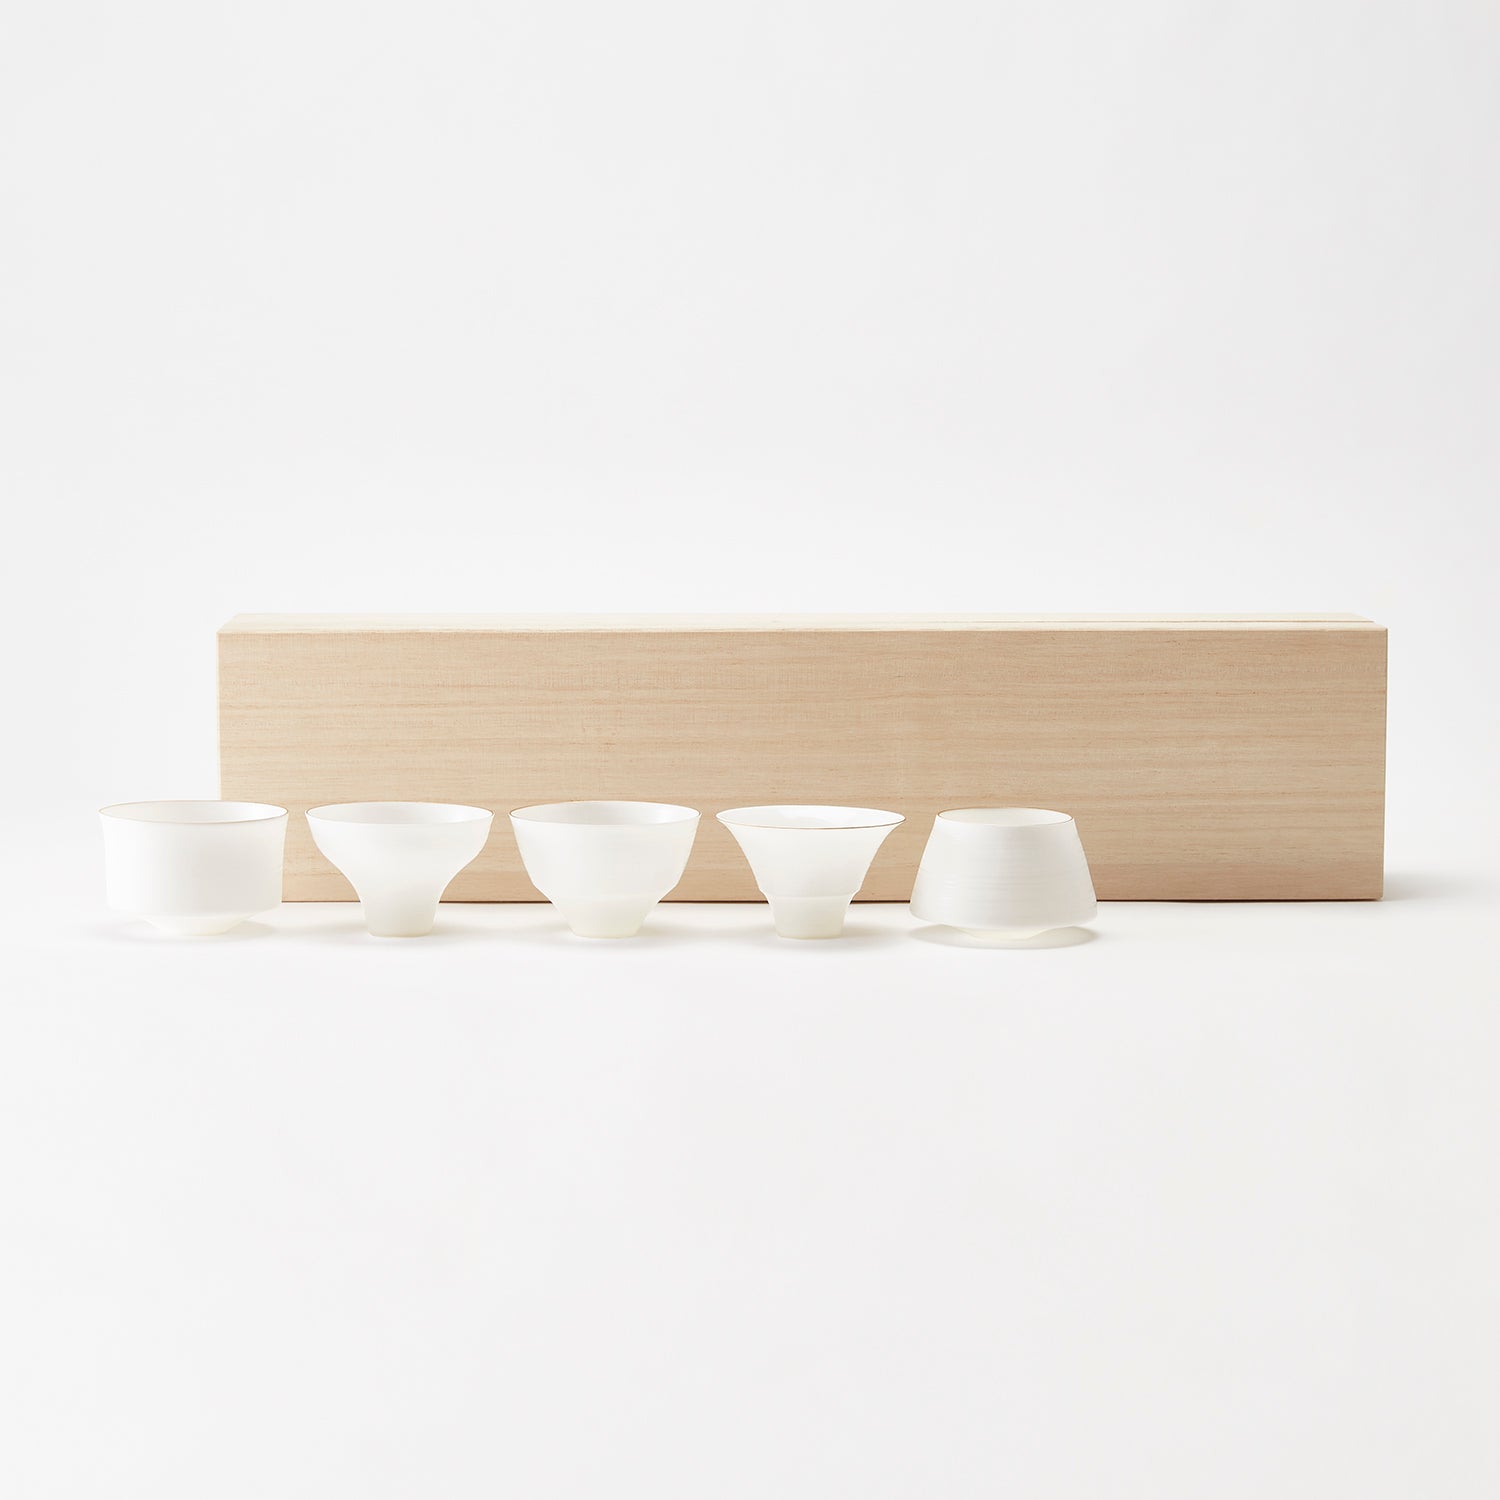 Egg Shell Sake Cup Set. White, thin porcelain as thin as egg shells. Comes with wooden box.